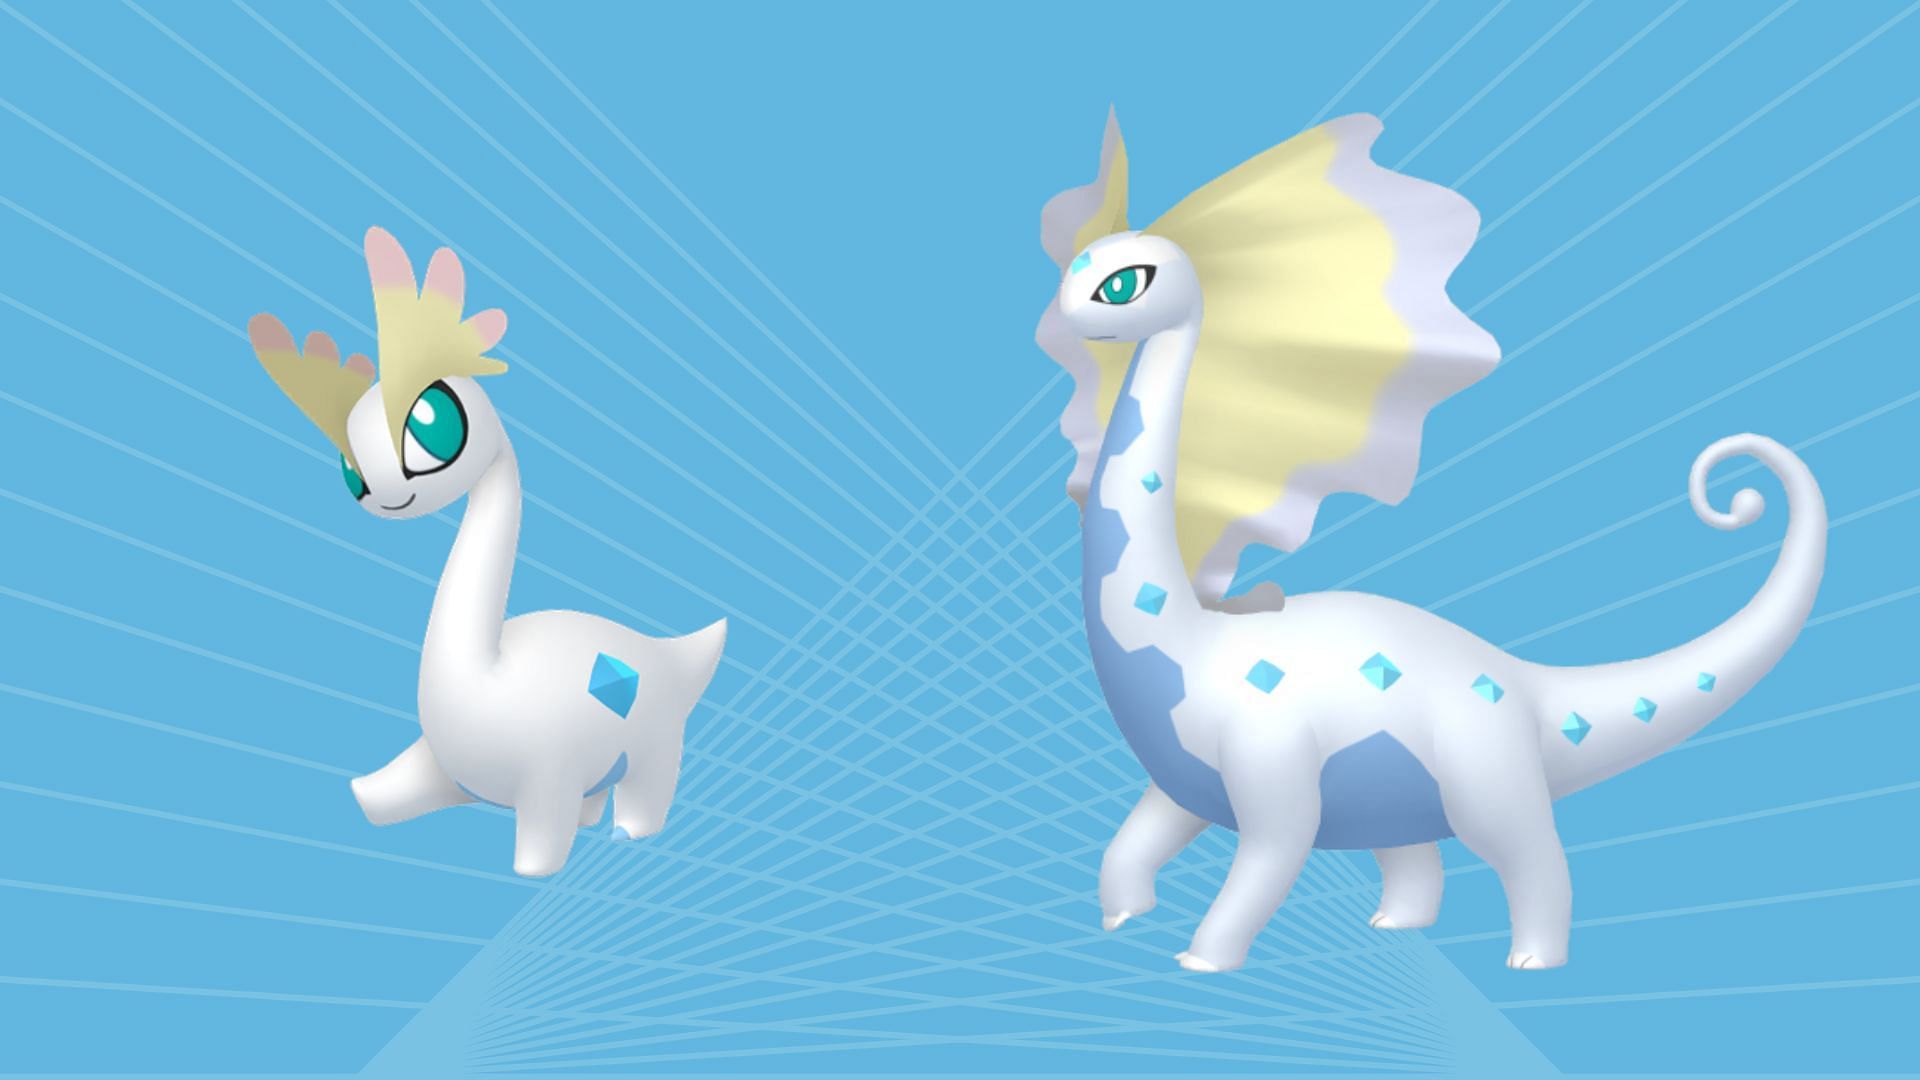 All Shiny Mythical Pokemon in Pokemon GO, ranked from worst to best